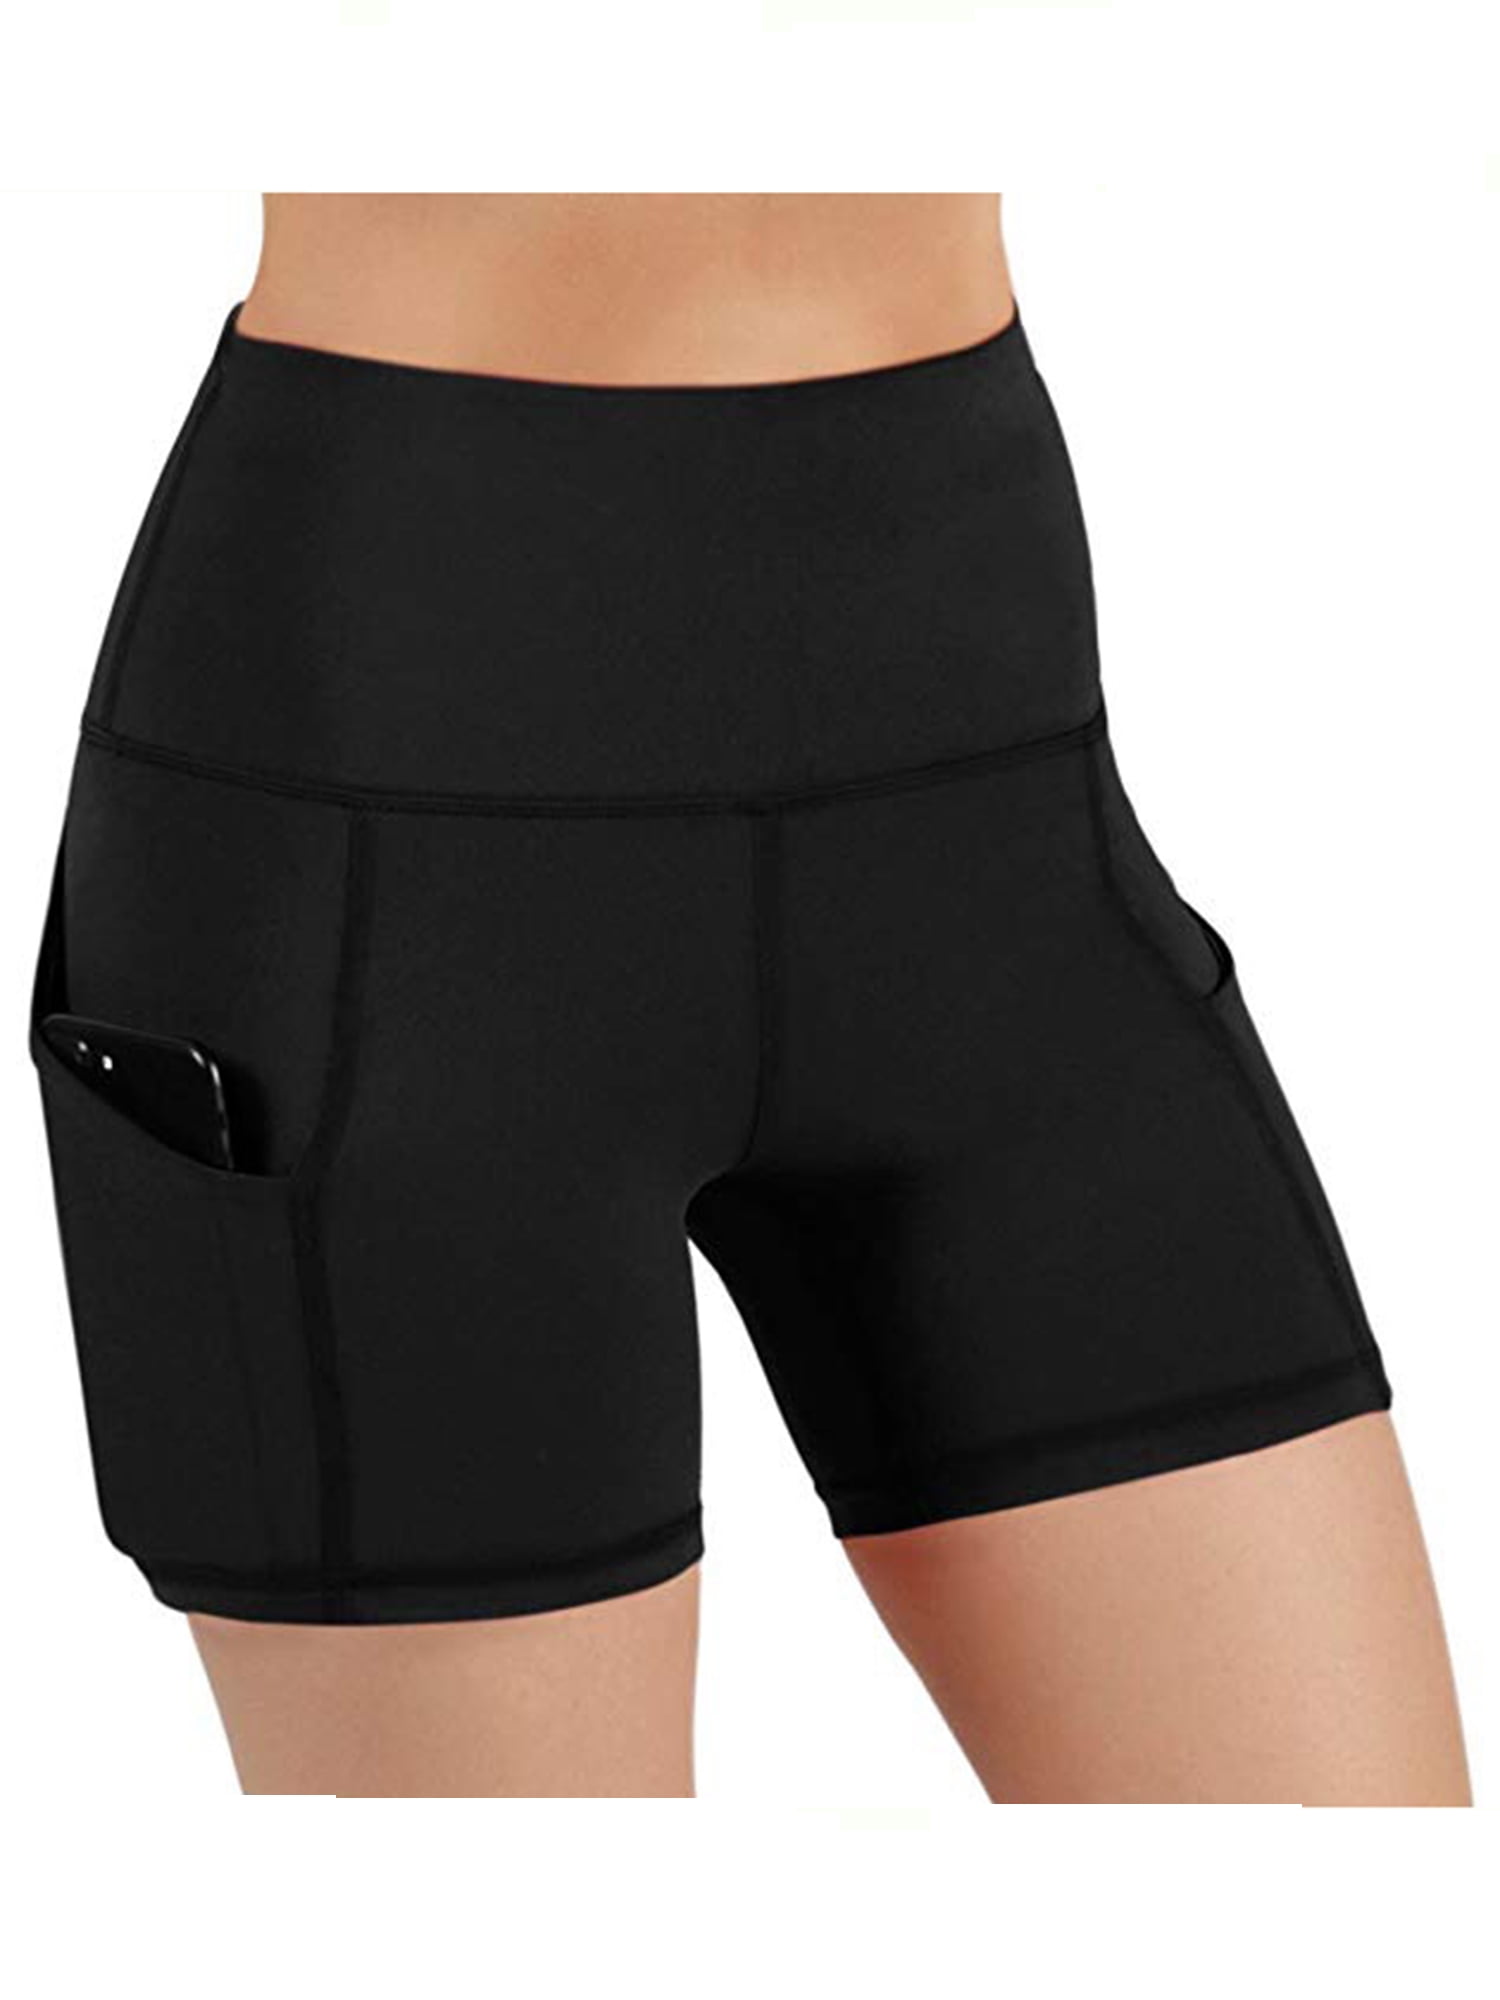 Gym Shorts with Side Pockets Yoga Running CAMBIVO Womens Yoga Running Shorts Daily Leisure High Waist Tummy Control Workout legging Shorts for Sport Cycling 